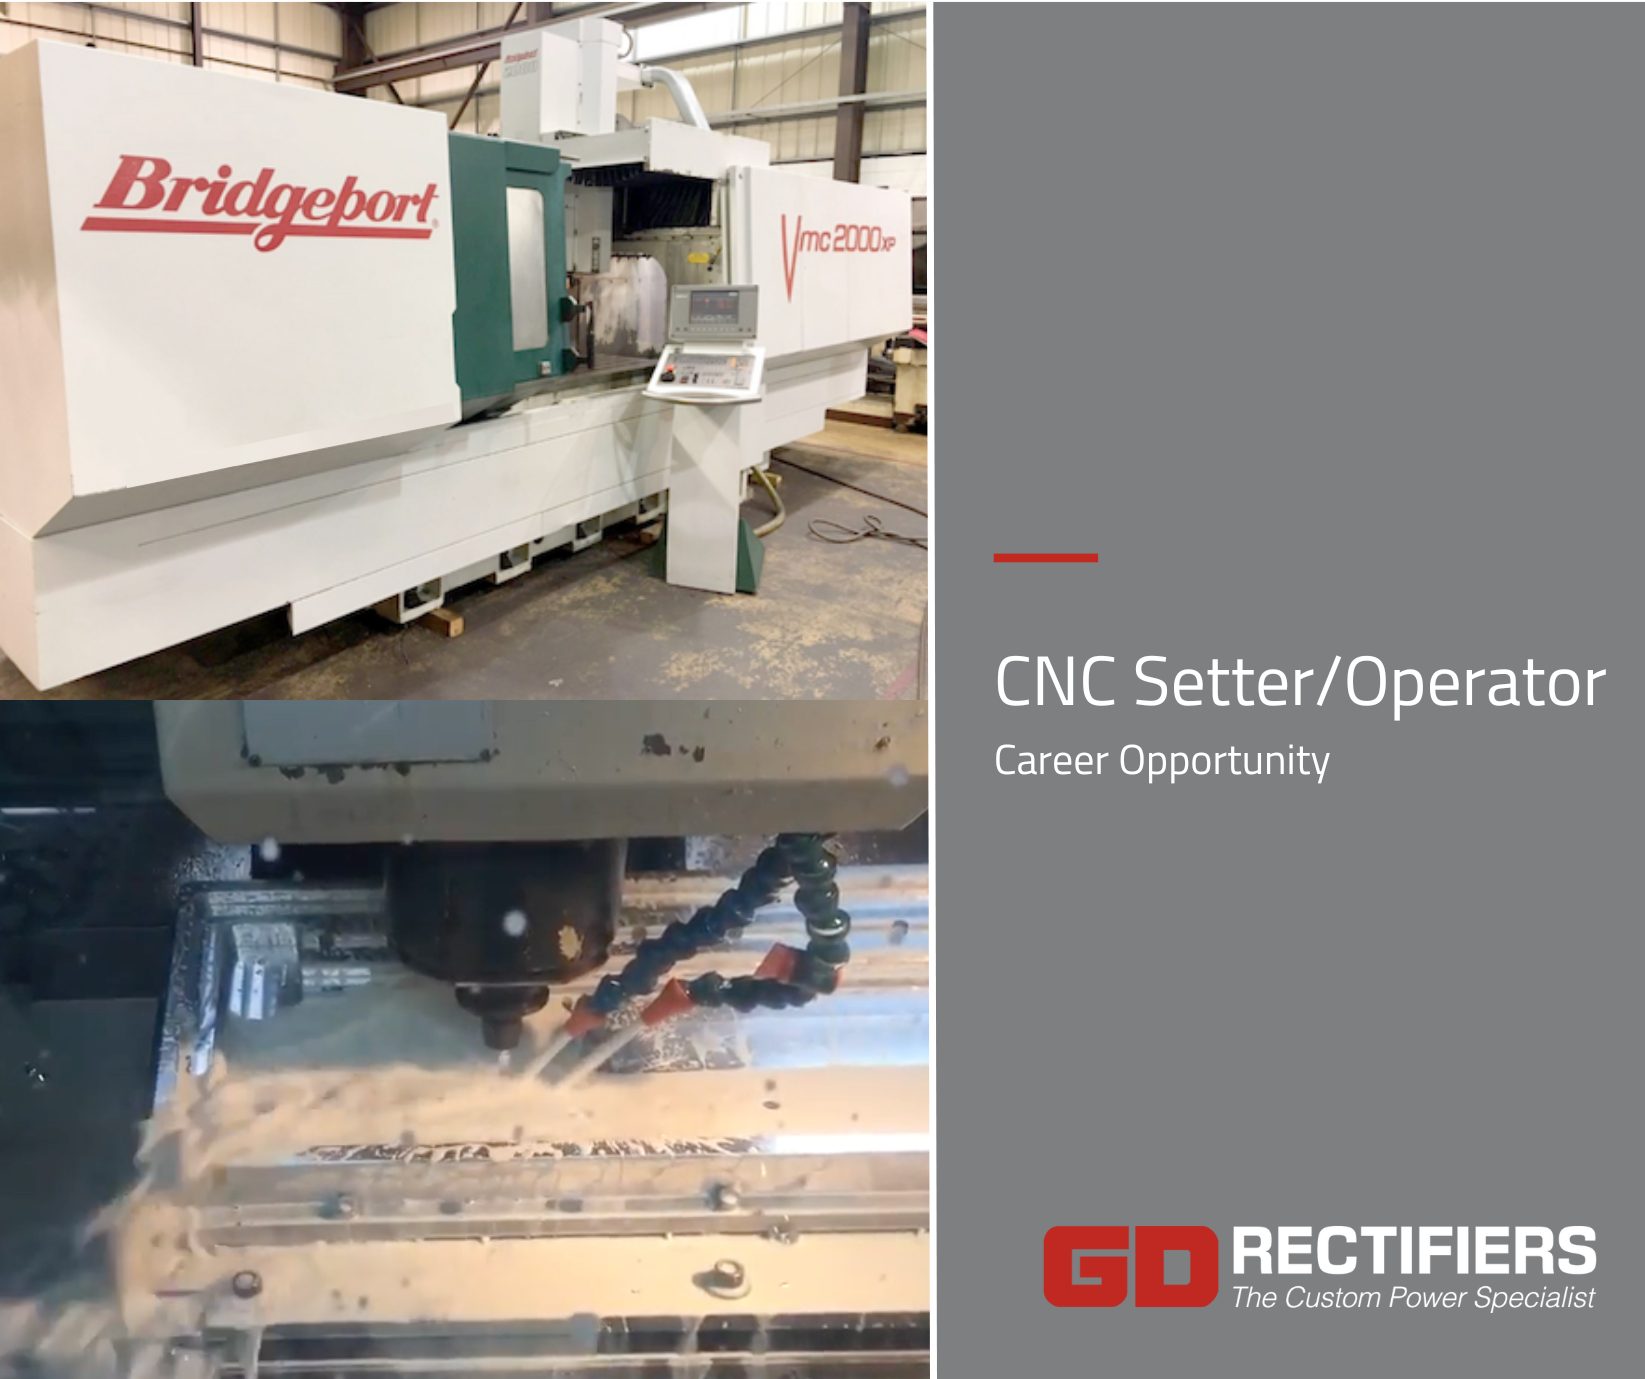 CNC Setter/Operator role at GD Rectifiers